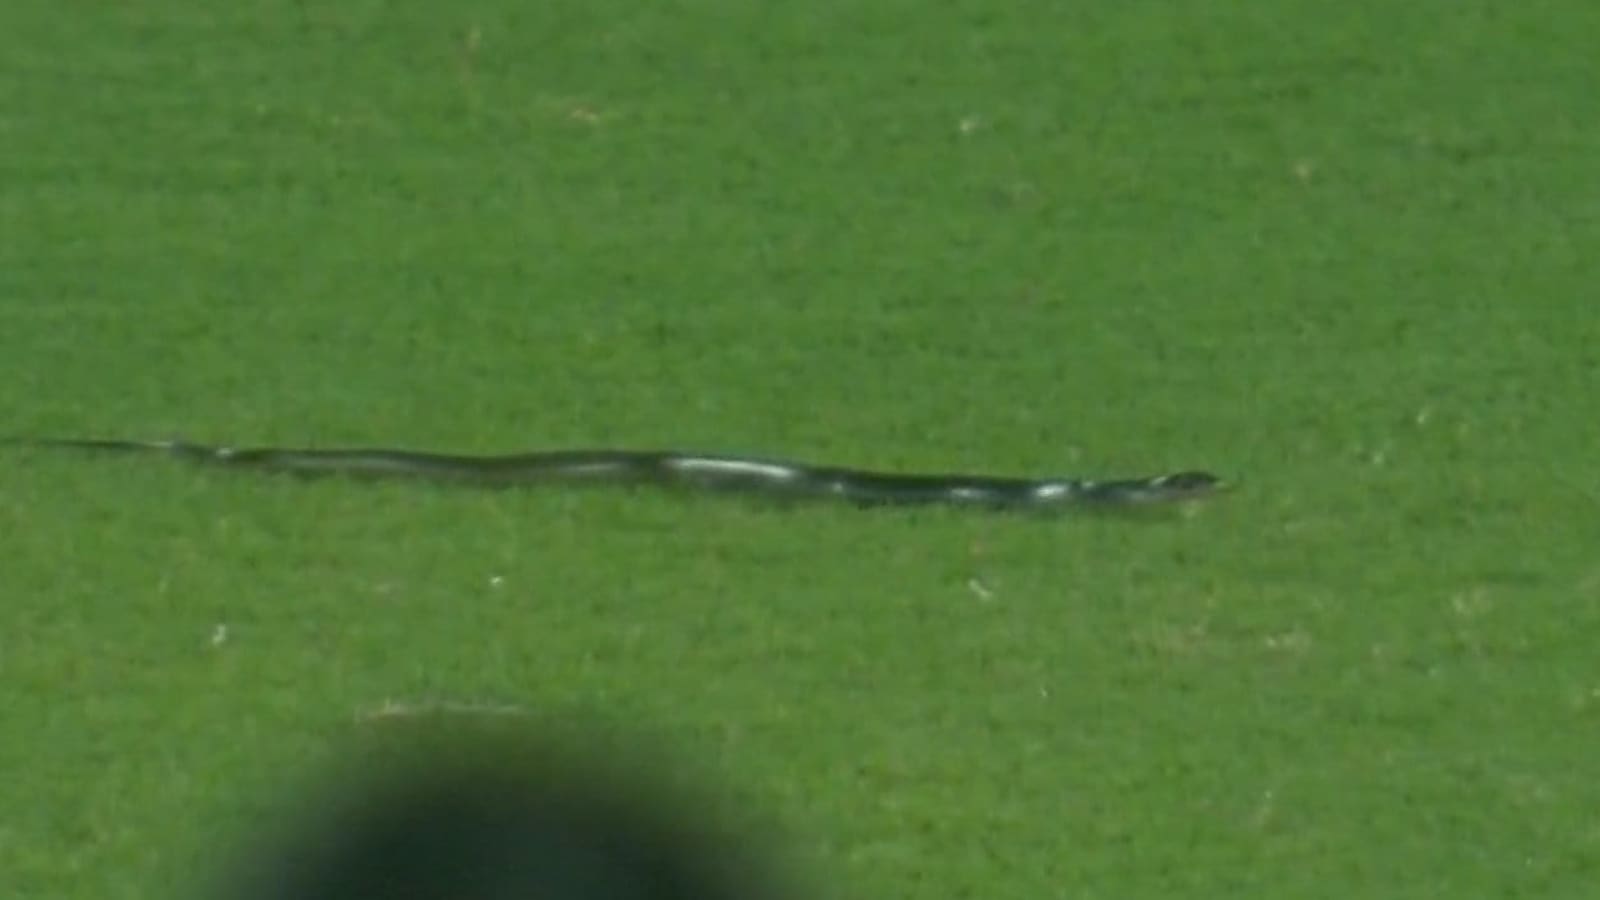 Watch: Snake found during 2nd IND vs SA T20, ground-staff catch and take it  away | Cricket - Hindustan Times